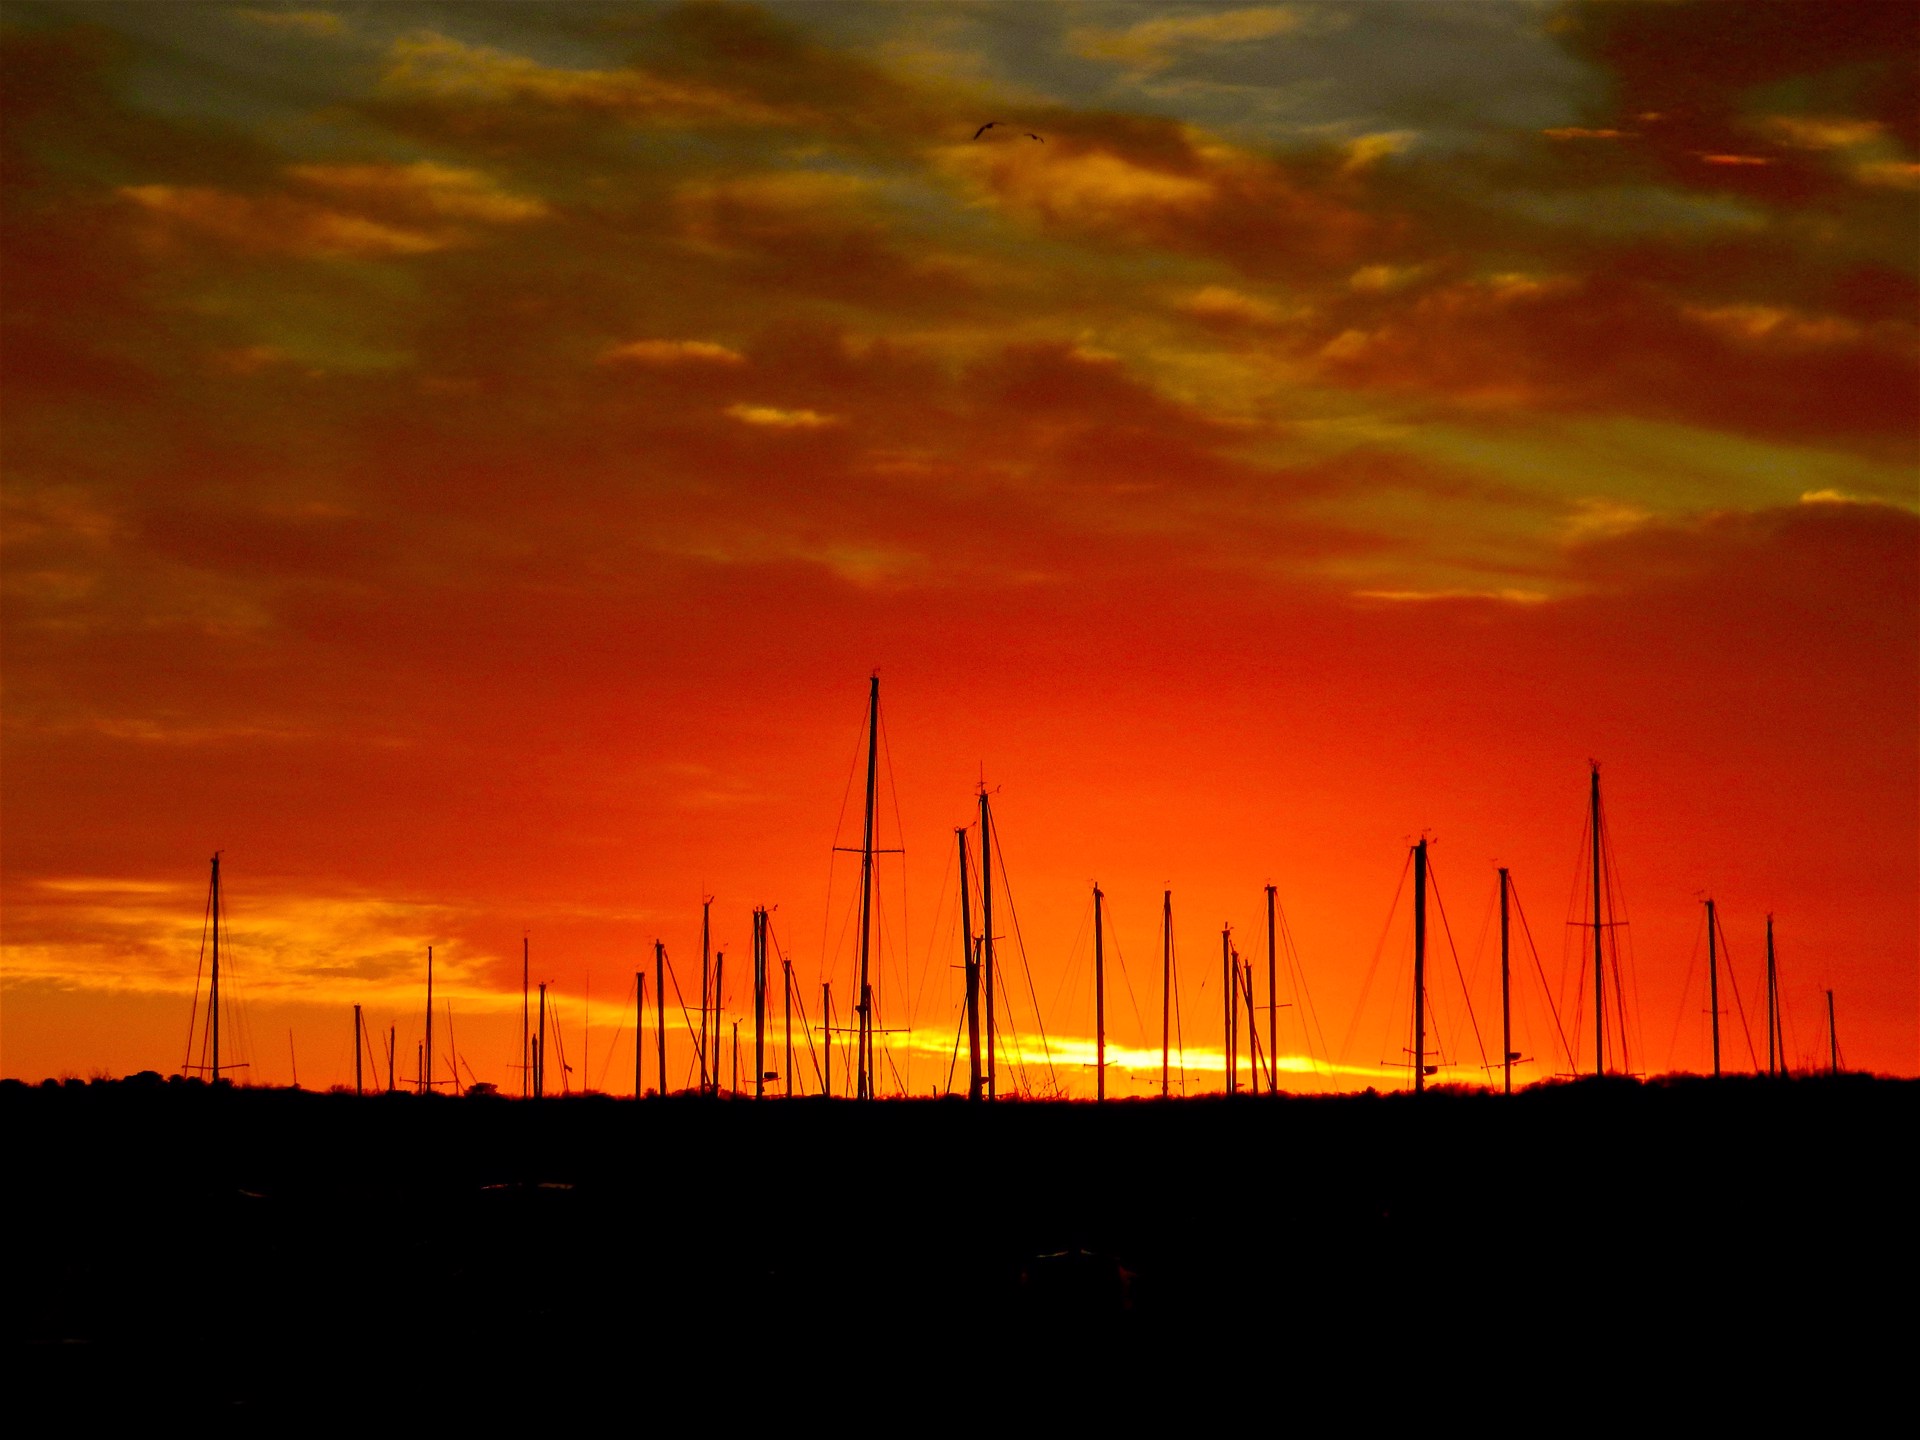 Masts by Kat O'Neill